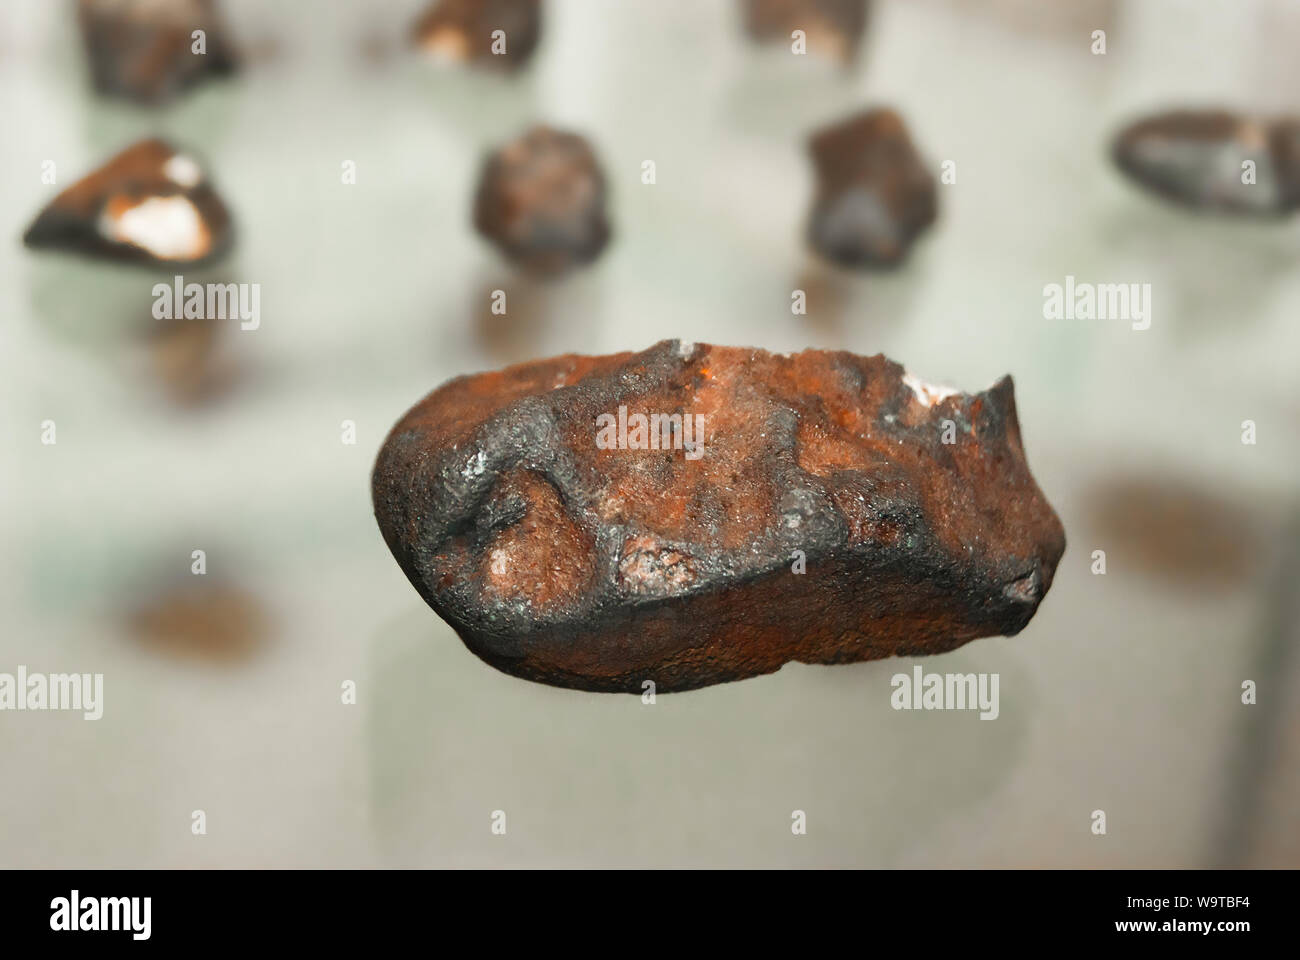 fragment of a meteorite on a glass showcase close up, against the background of other blurry fragments Stock Photo